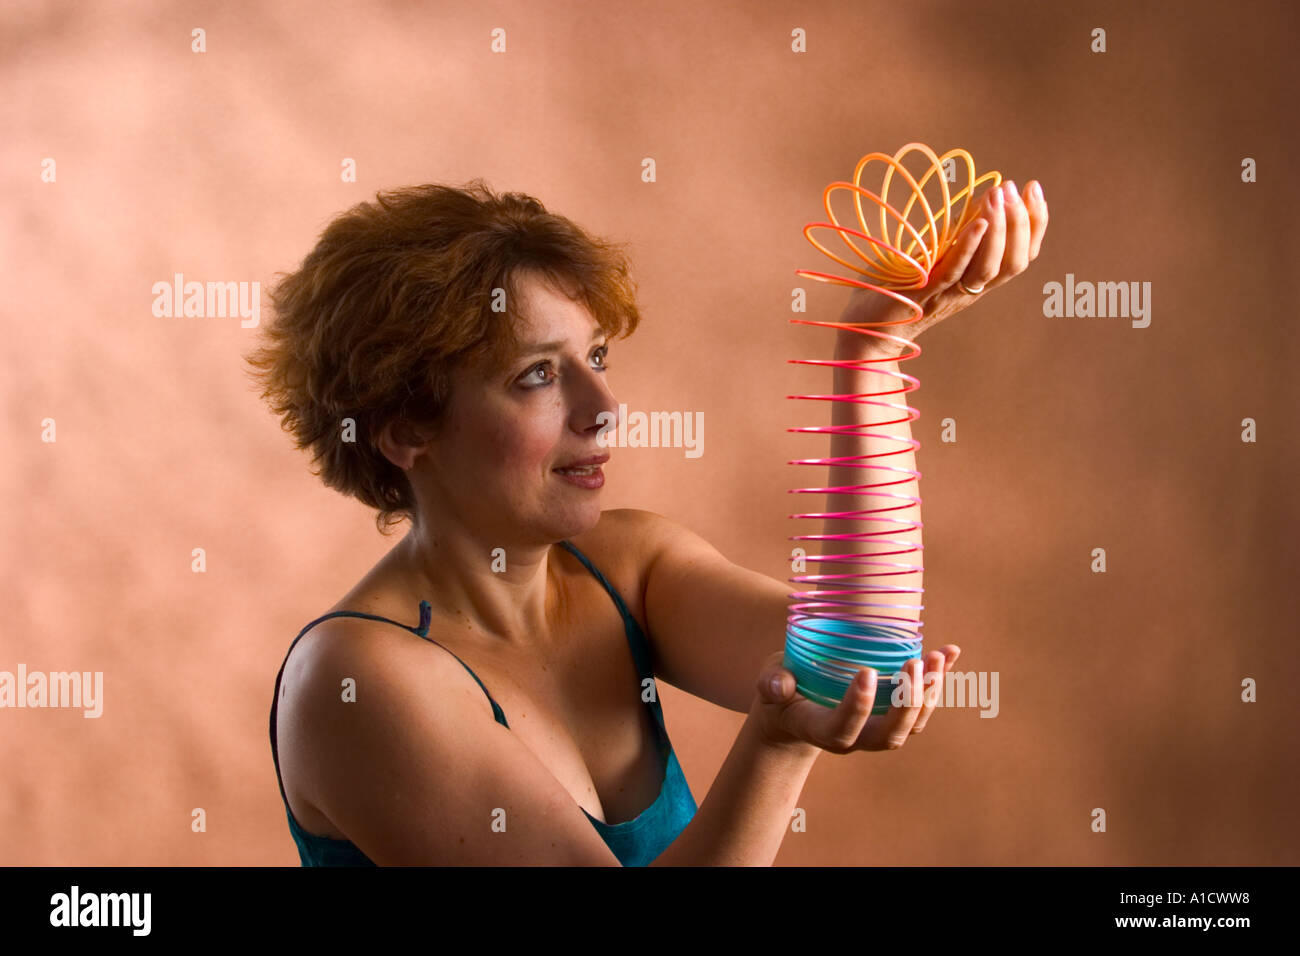 Woman playing with a slinky toy Stock Photo